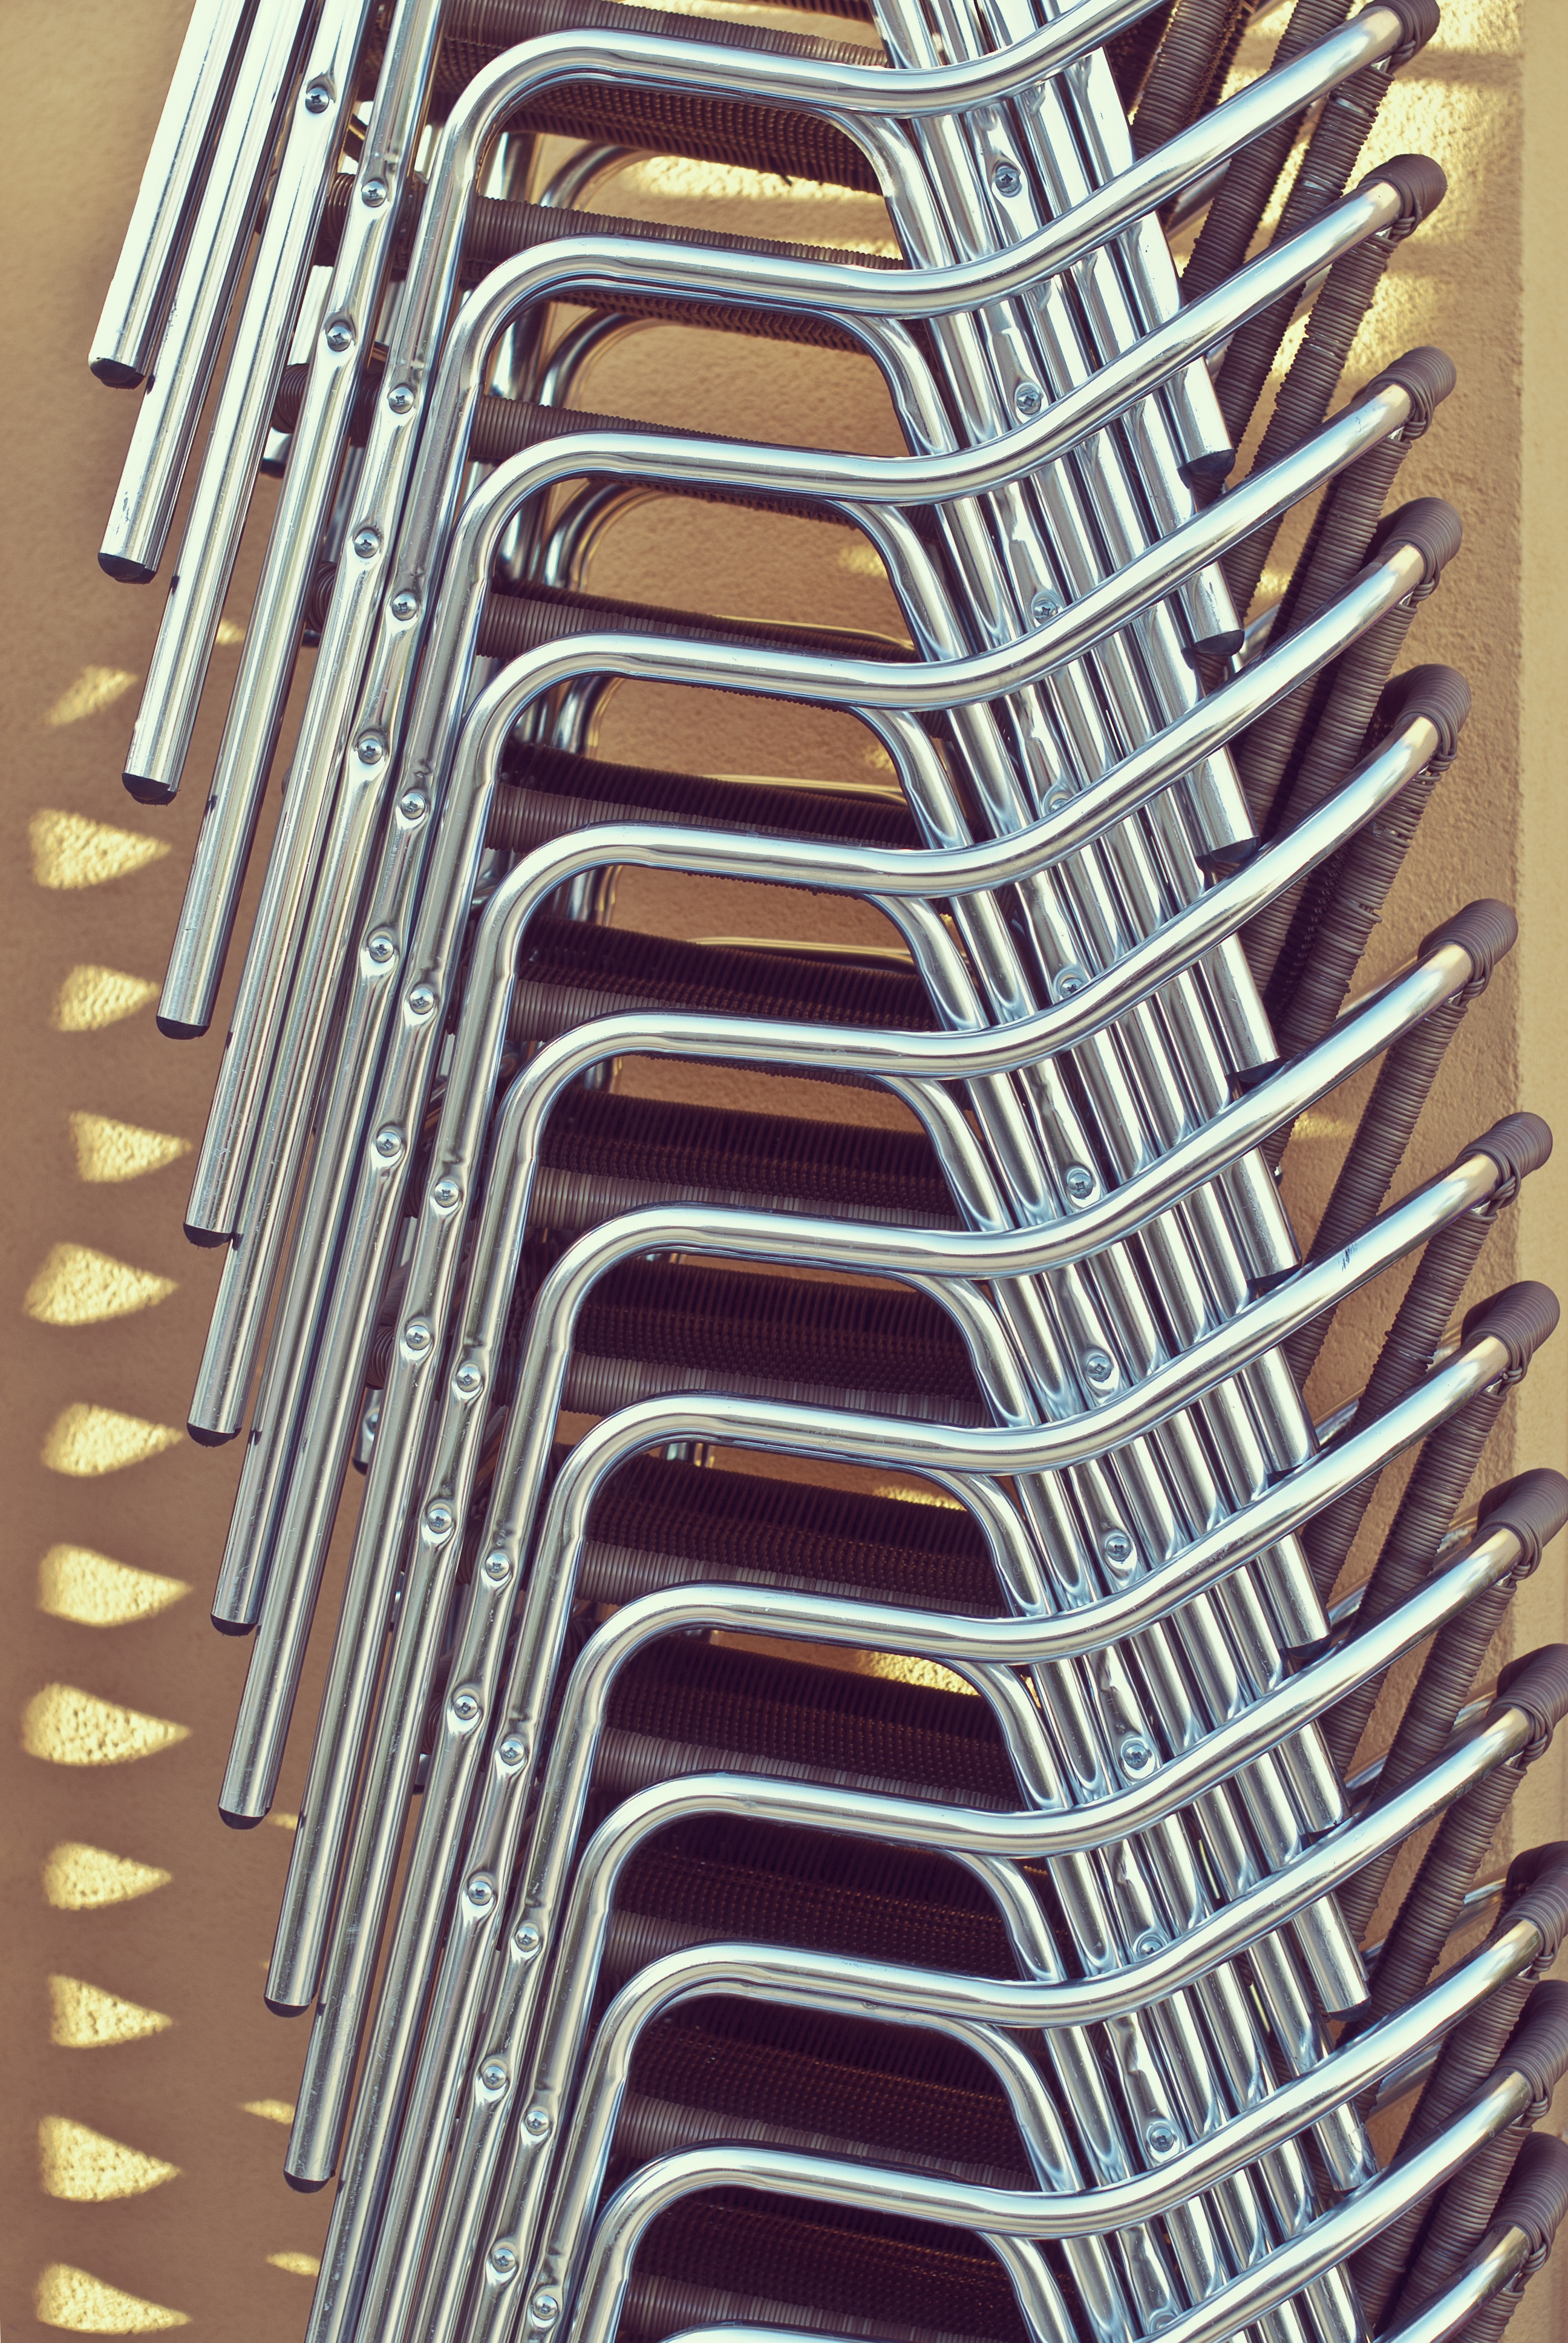 chrome and brown piled chairs